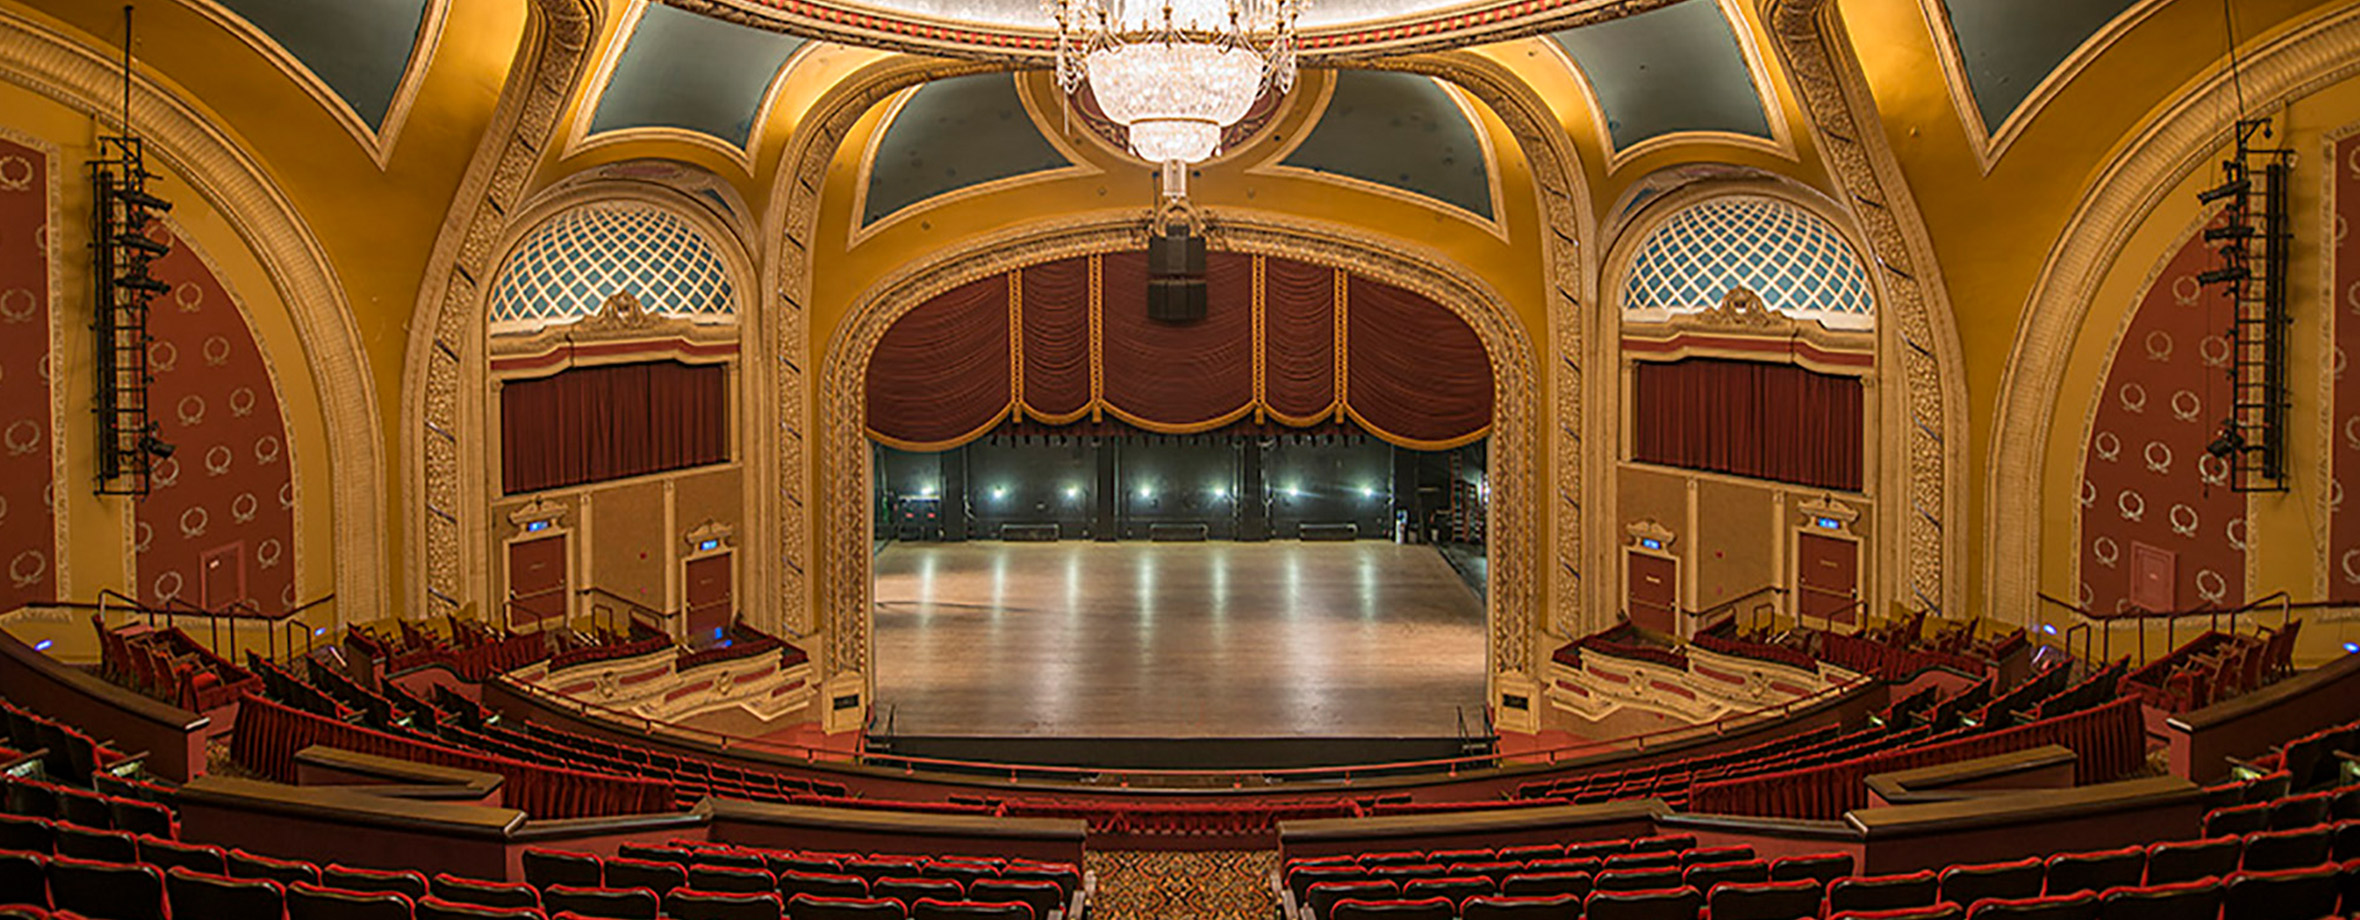 The Hennepin Theatre's stage and chandelier